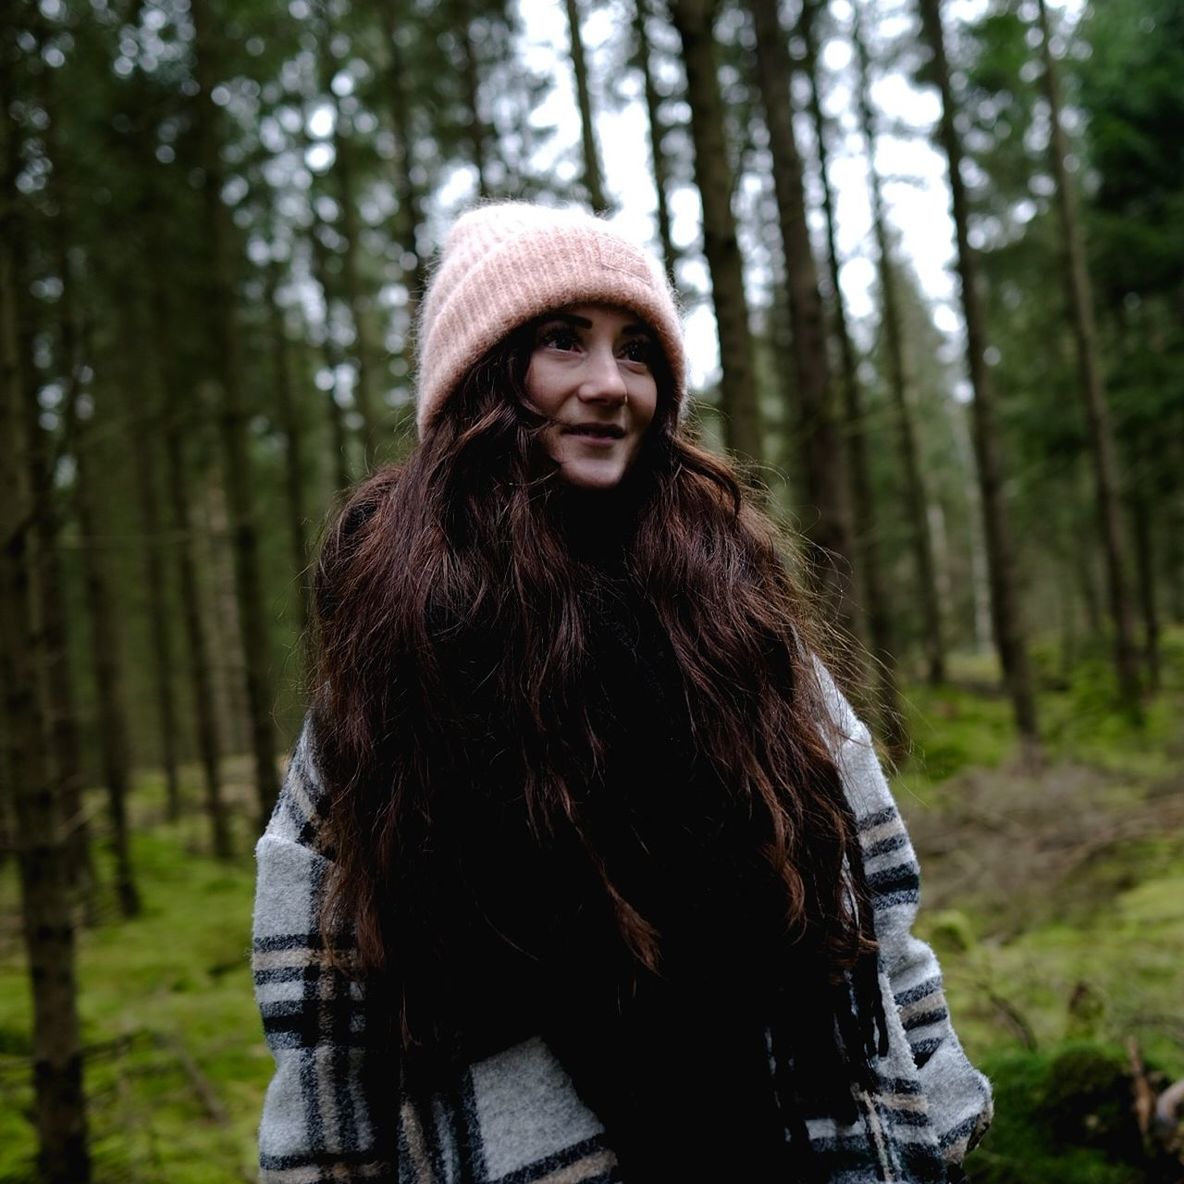 forest, tree, long hair, one person, land, plant, adult, clothing, woodland, hairstyle, nature, leisure activity, portrait, women, young adult, smiling, warm clothing, lifestyles, hat, brown hair, front view, standing, day, looking at camera, waist up, knit hat, pine woodland, pinaceae, focus on foreground, coniferous tree, happiness, outdoors, winter, non-urban scene, natural environment, casual clothing, wilderness, pine tree, tree trunk, trunk, three quarter length, autumn, beanie, beauty in nature, emotion, person, looking